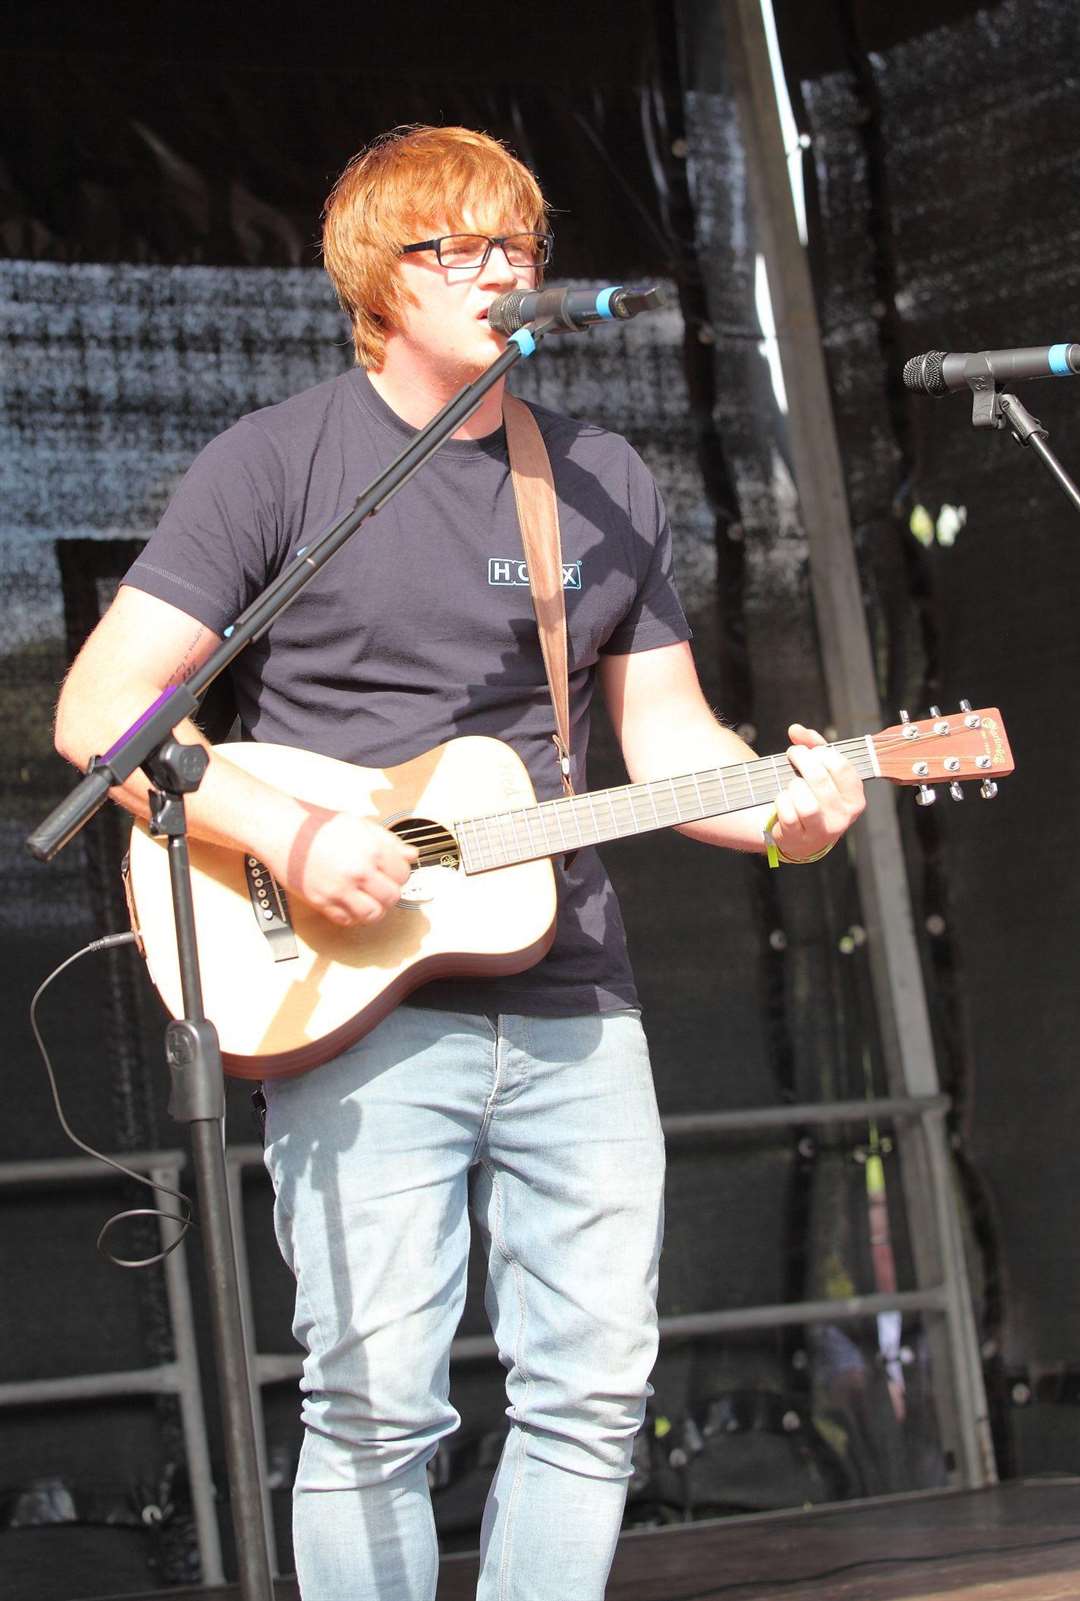 Ed Sheeran tribute act Jack Shepherd will be performing at the festival. (2470158)